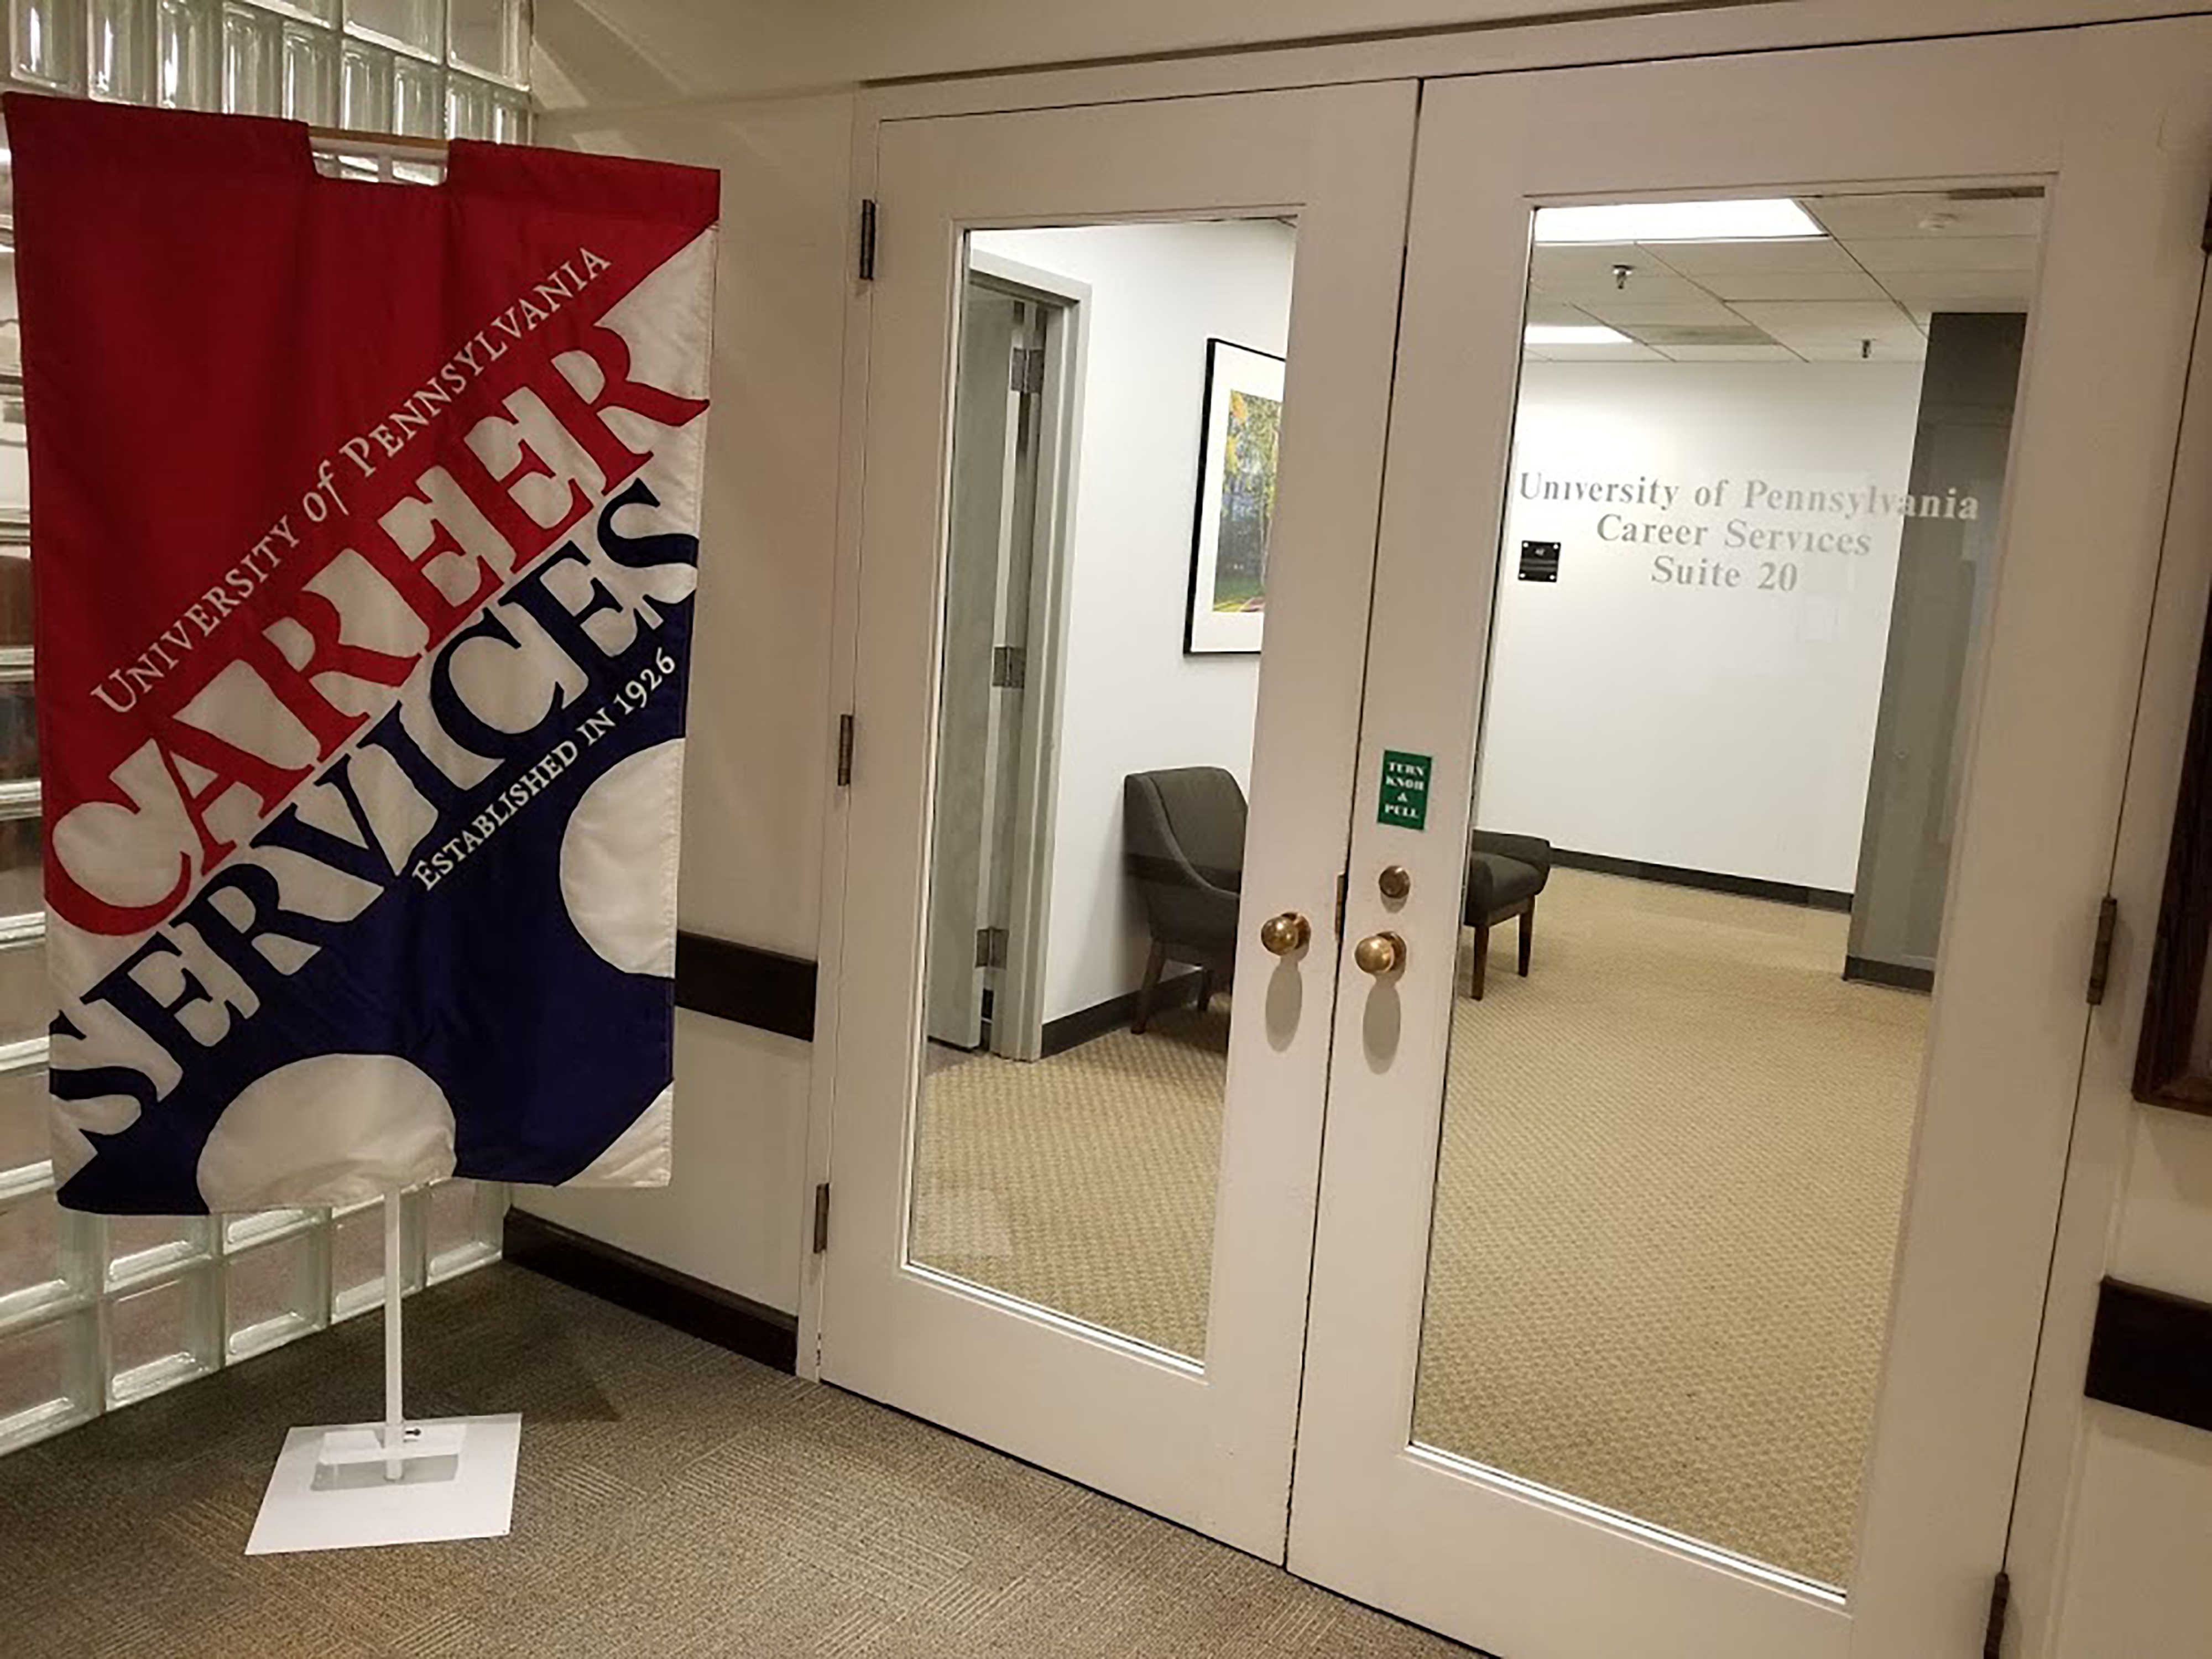 Double doors lead into a waiting area. A large banner to the left reads, "University of Pennsylvania Career Services Established in 1926. 